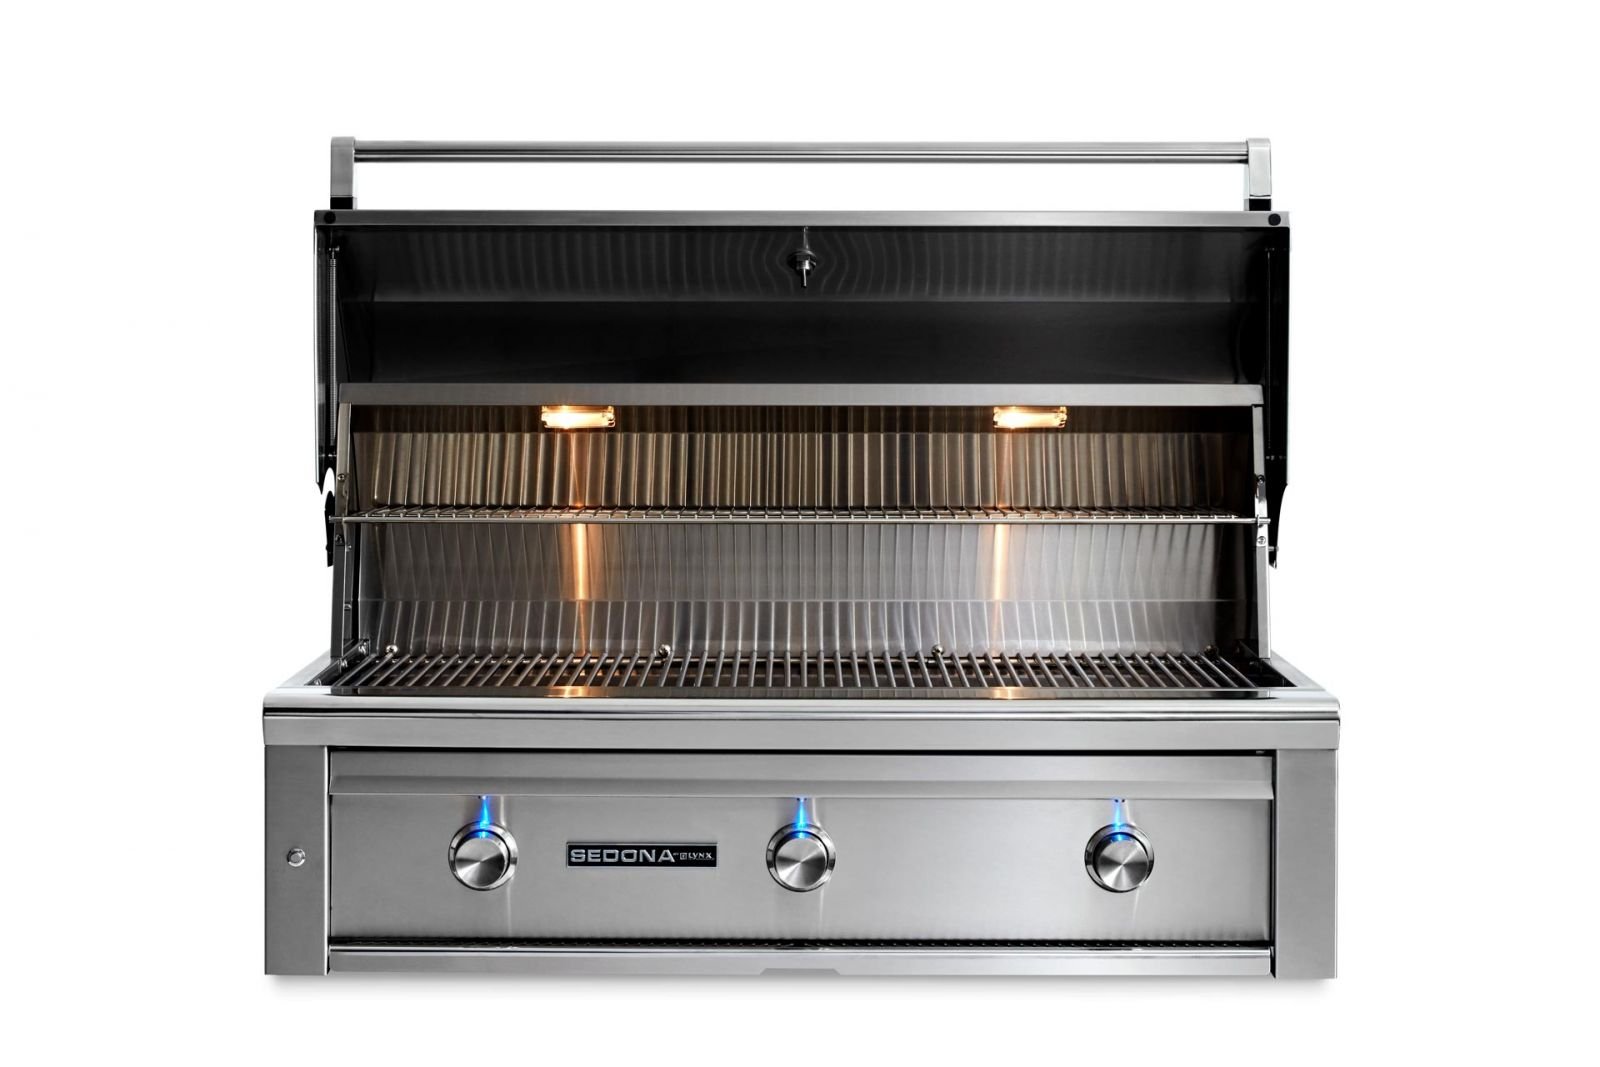 42" Built-in Grill with 3 Stainless Steel Burners (L700)